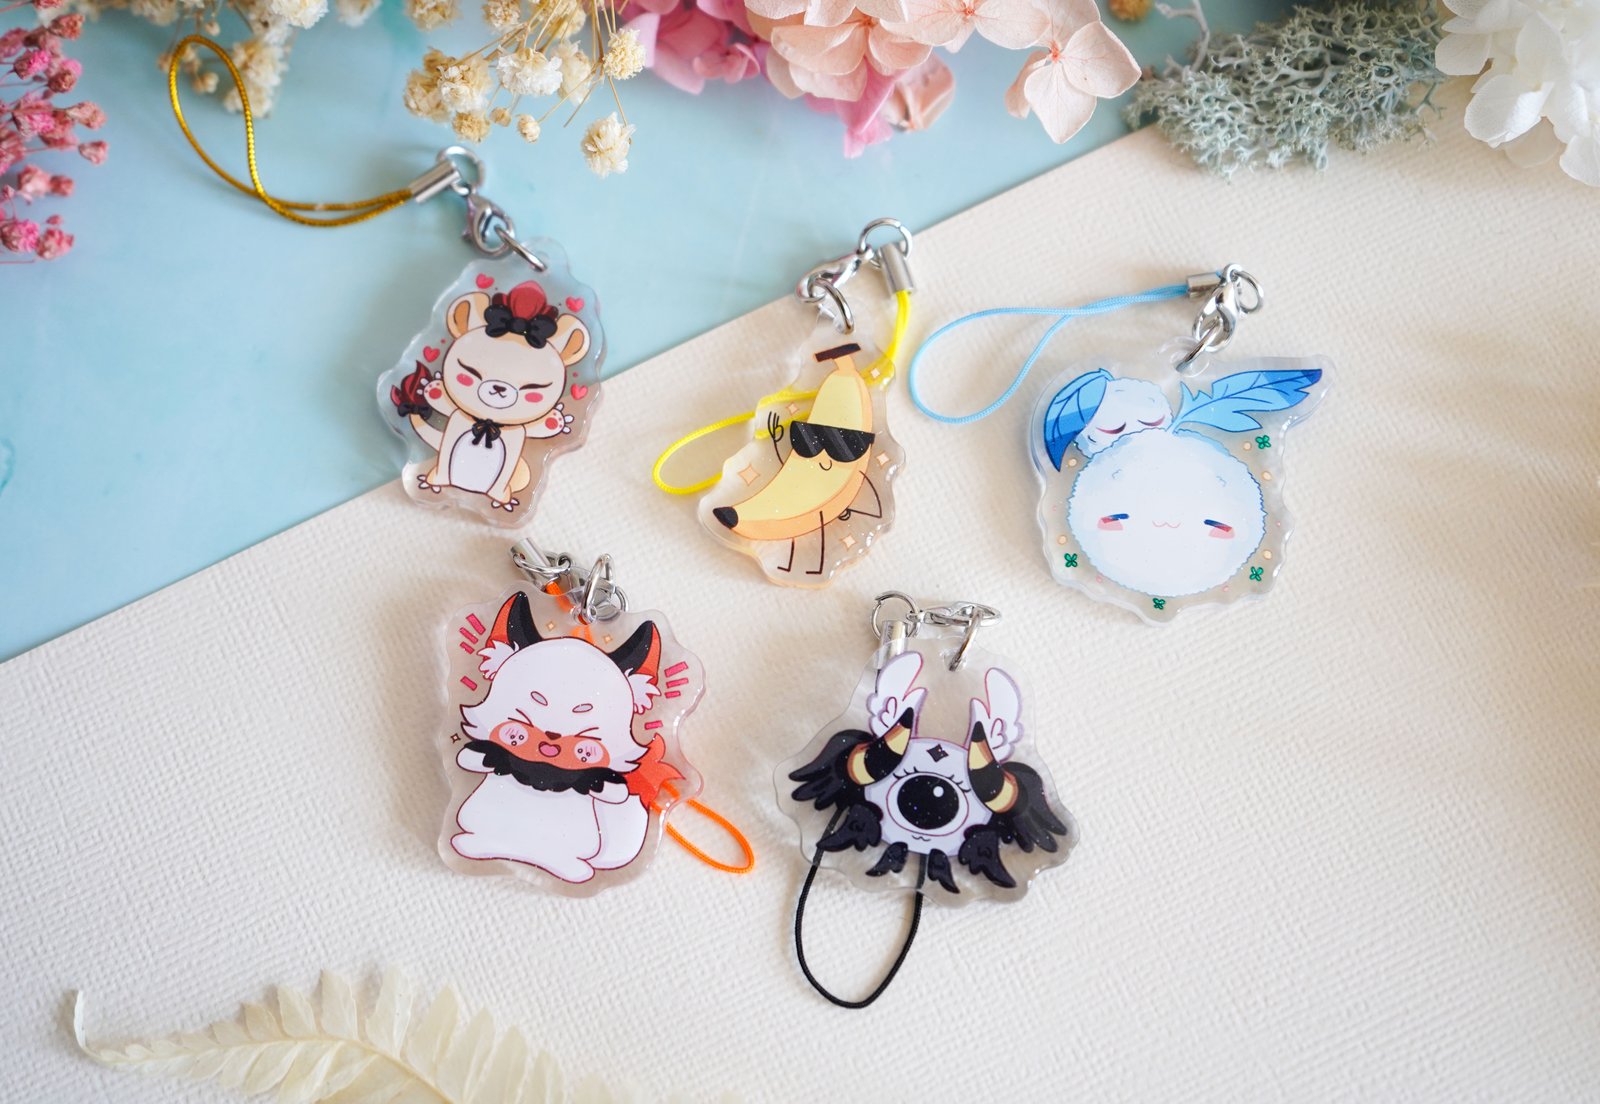 Amazon.com: XIAOATAO Hello Kitty Charms, Cute Cell Phone Charm Anime Diy  Decoration Cat Charms for Jewelry Making Phone Charm Kawaii (Yellow cat) :  Cell Phones & Accessories